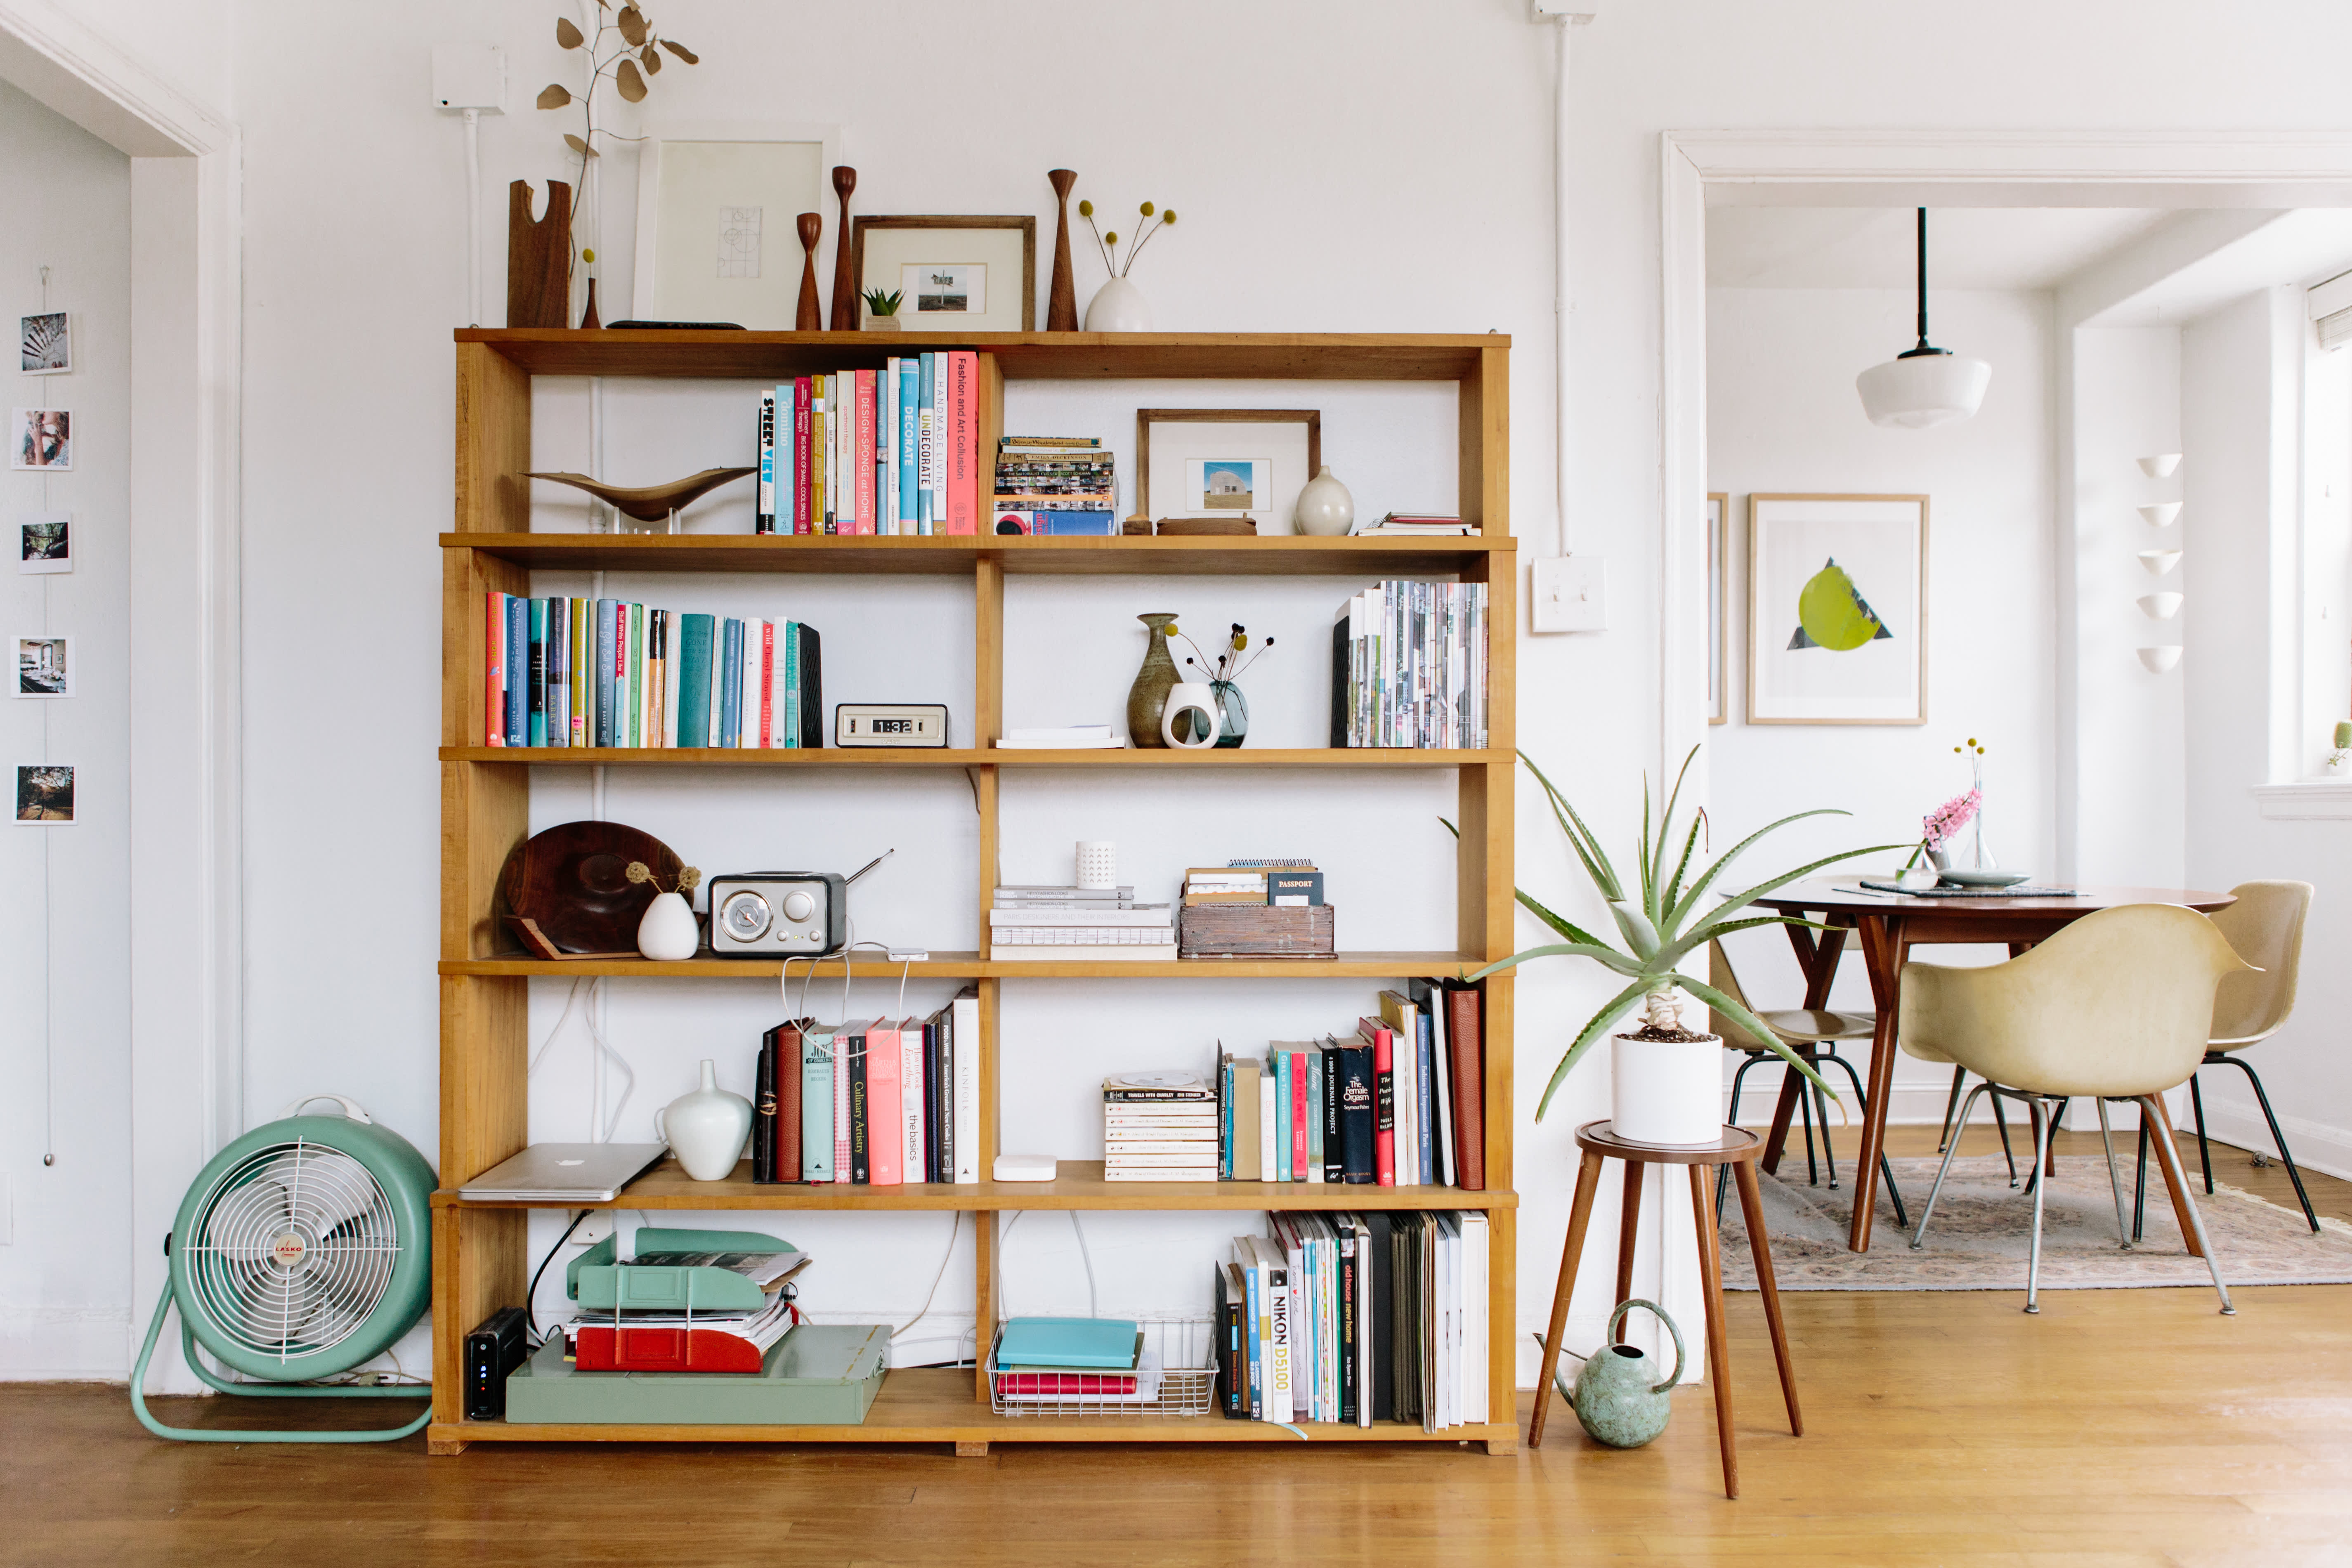 Shelving and Storage Solutions for Apartments Large and Small